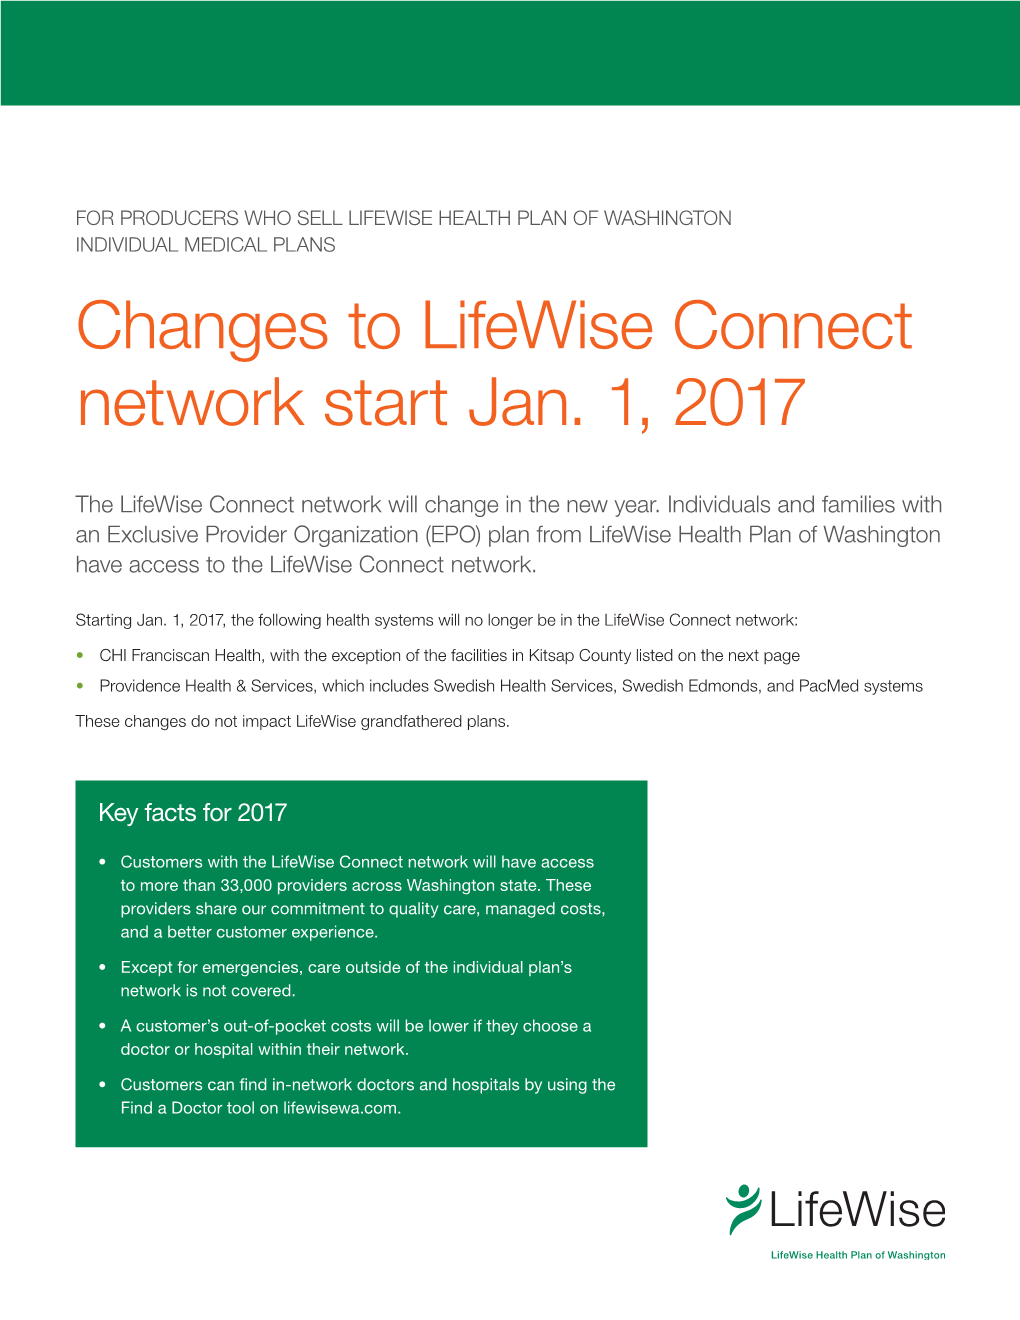 Changes to Lifewise Connect Network Start Jan. 1, 2017